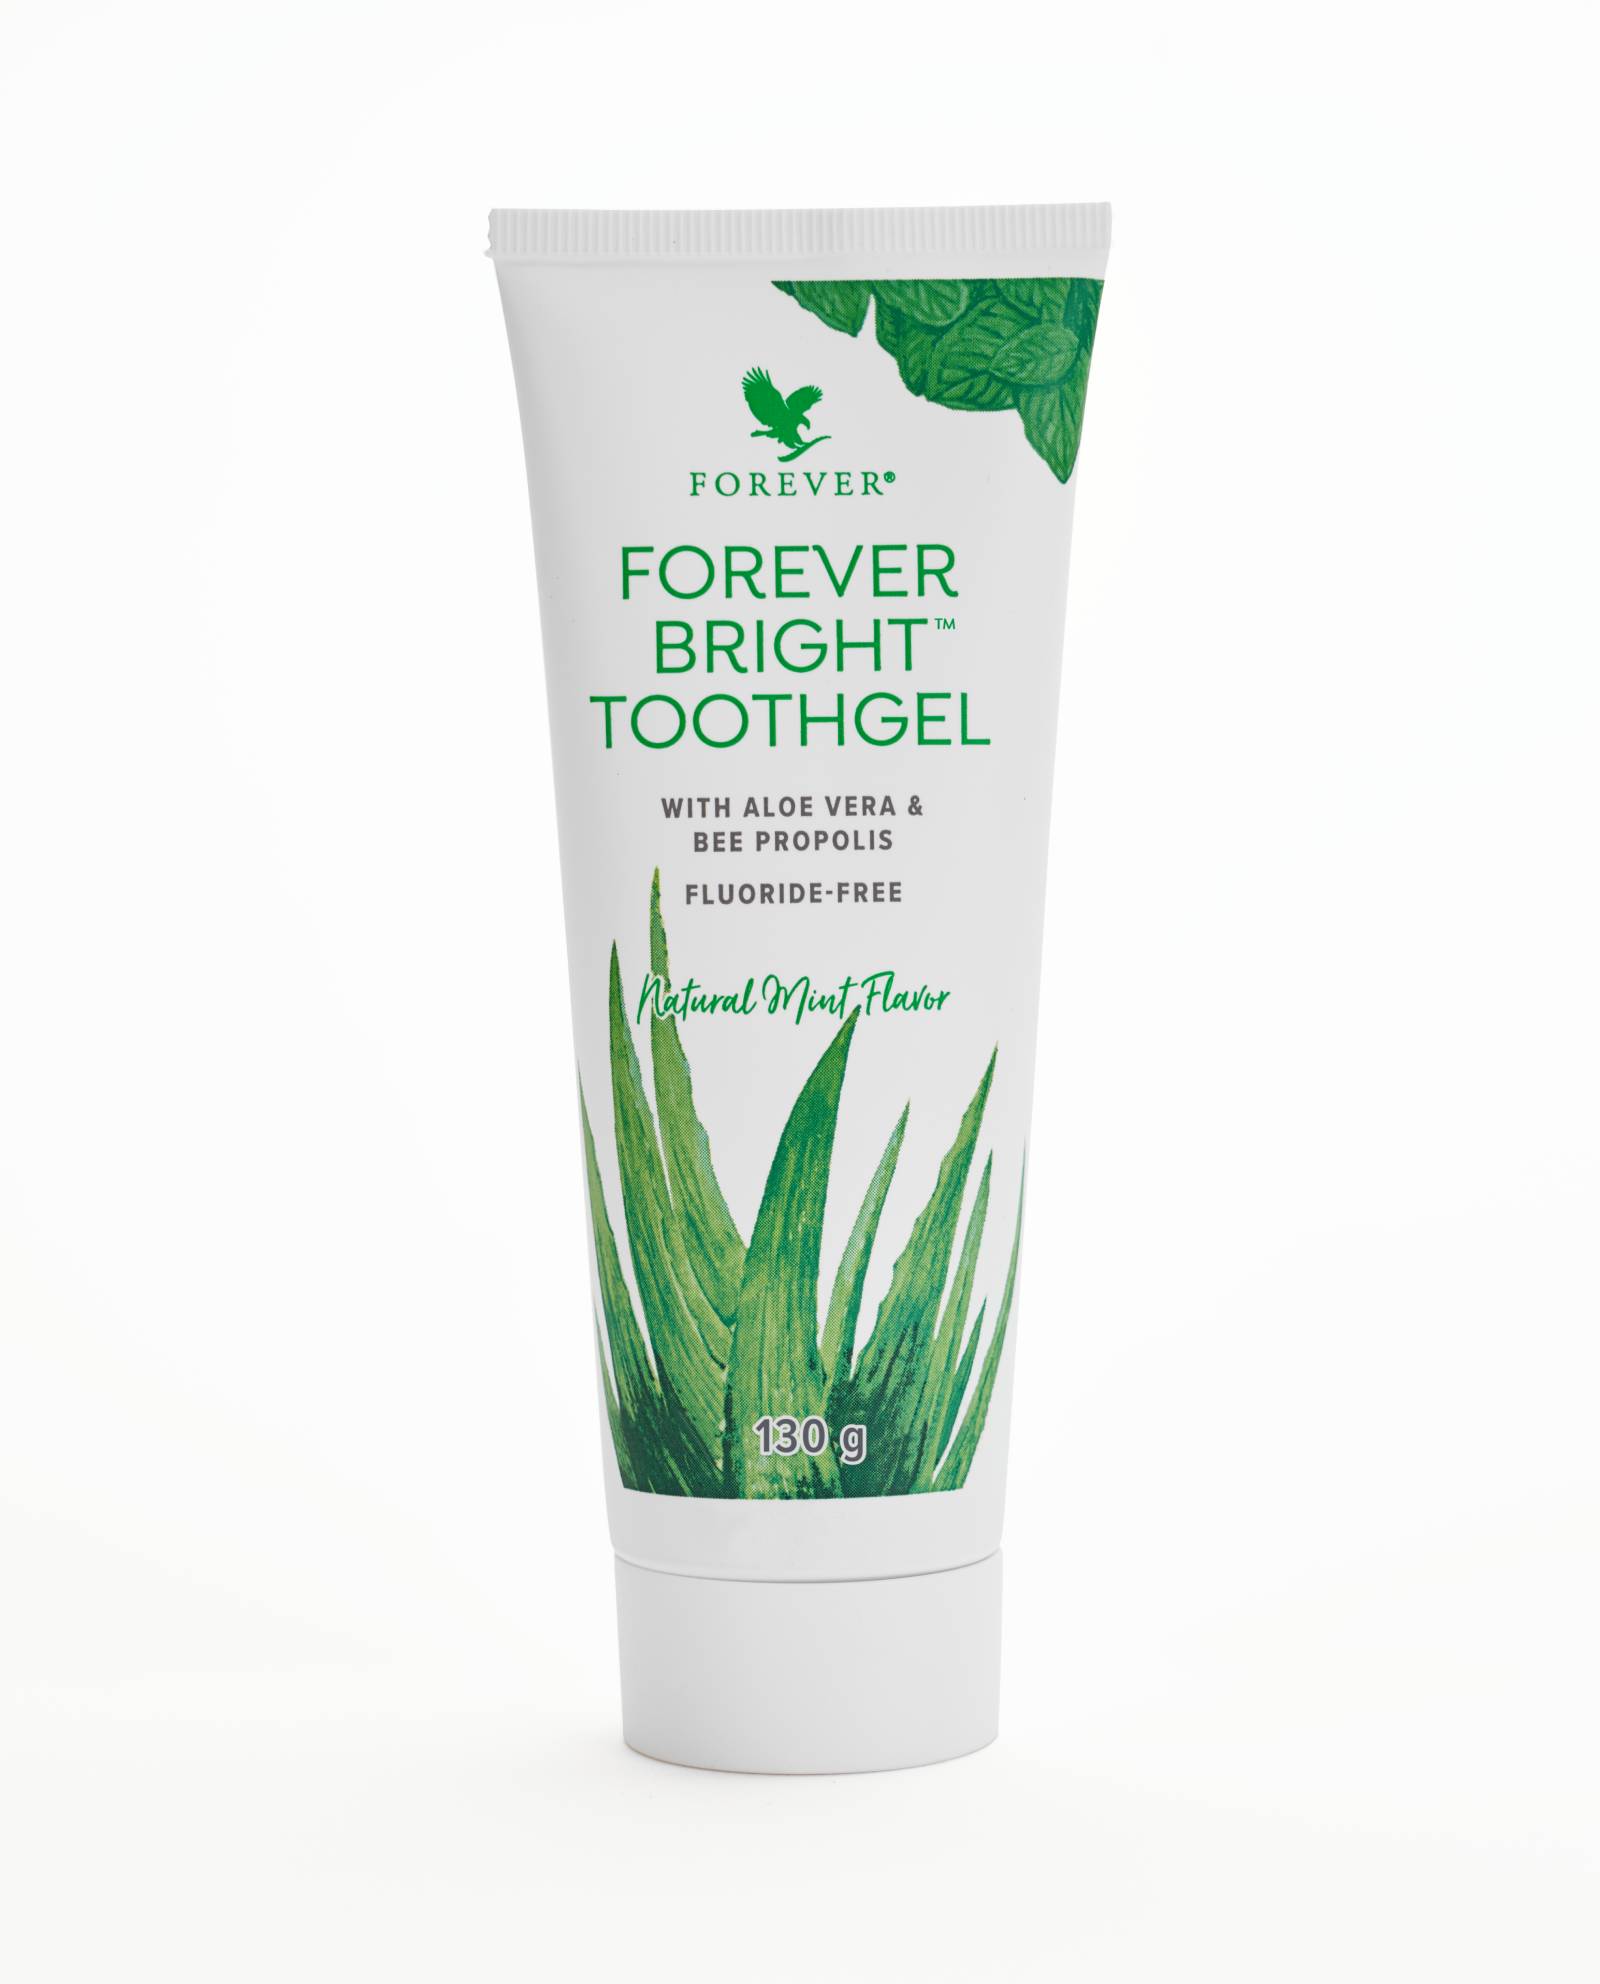 Created for the entire family – as well as your pets – this gentle, non-fluoride formula contains only the highest quality ingredients including aloe vera and bee propolis. Enjoy its natural mint flavour for a taste that will leave your mouth refreshed and your teeth clean. This toothgel is also suitable for vegetarians since it contains no animal by-products.&nbsp;